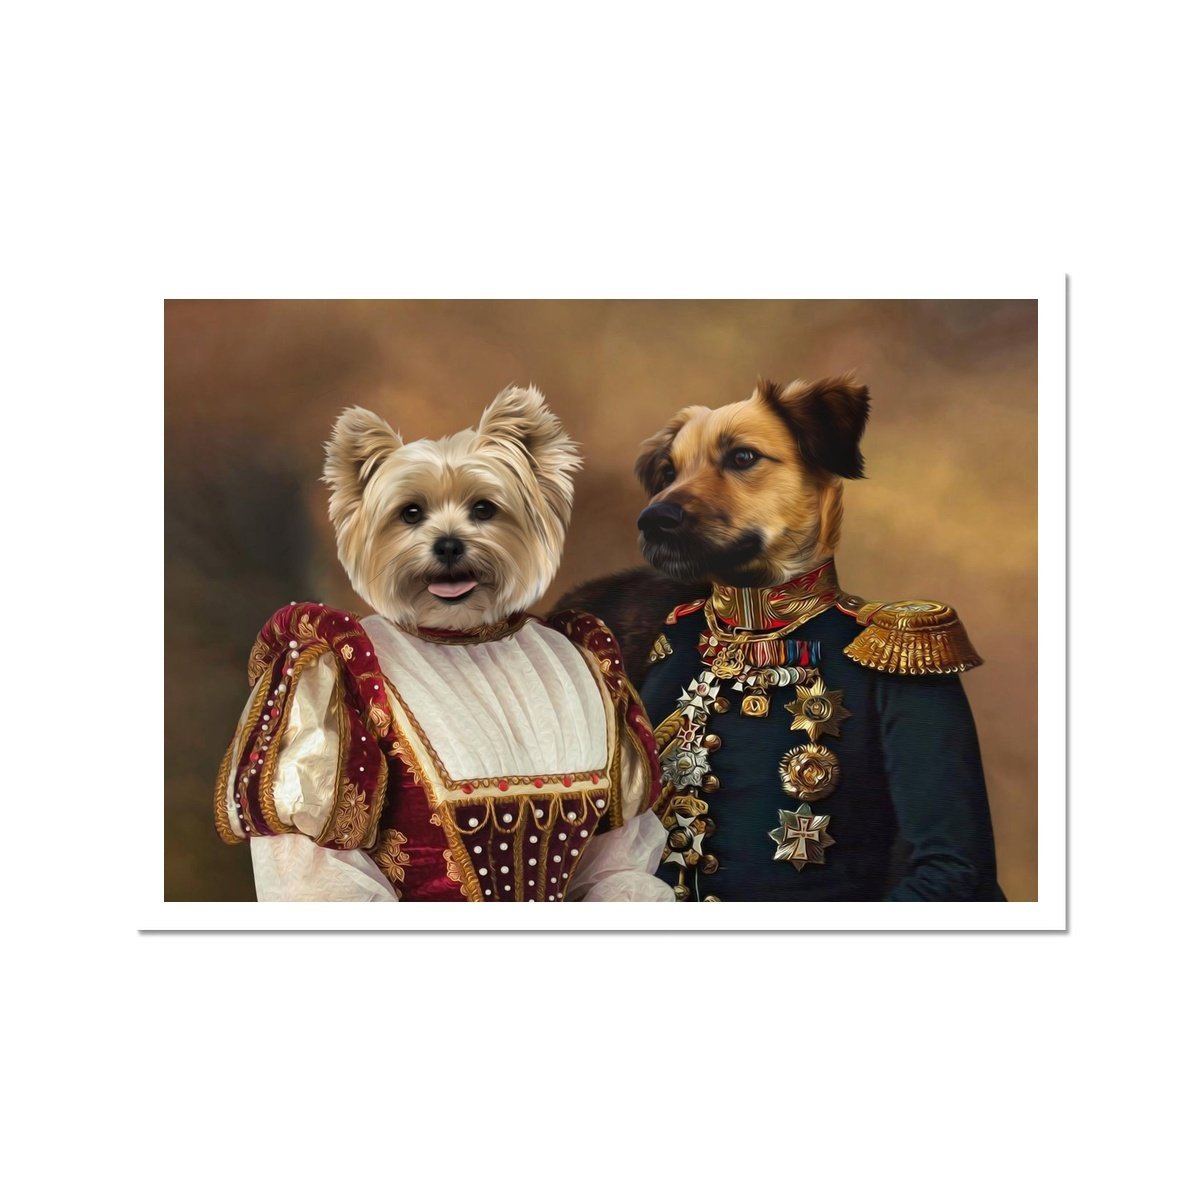 The Classy Pair: Custom Pet Poster - Paw & Glory - #pet portraits# - #dog portraits# - #pet portraits uk#Paw & Glory, paw and glory, watercolor of dog royal dog paintings personalized dog canvas print pet photo canvas pet portraits in uniform uk pup art pet portraits